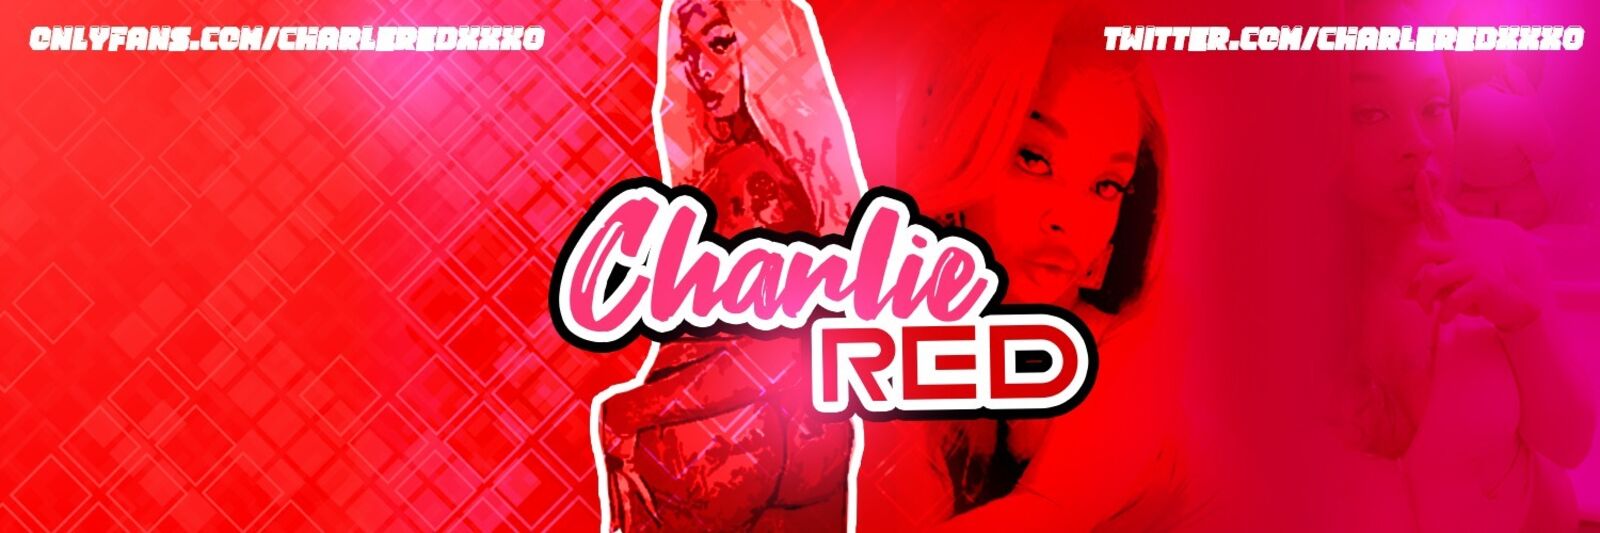 See Charlie Red profile